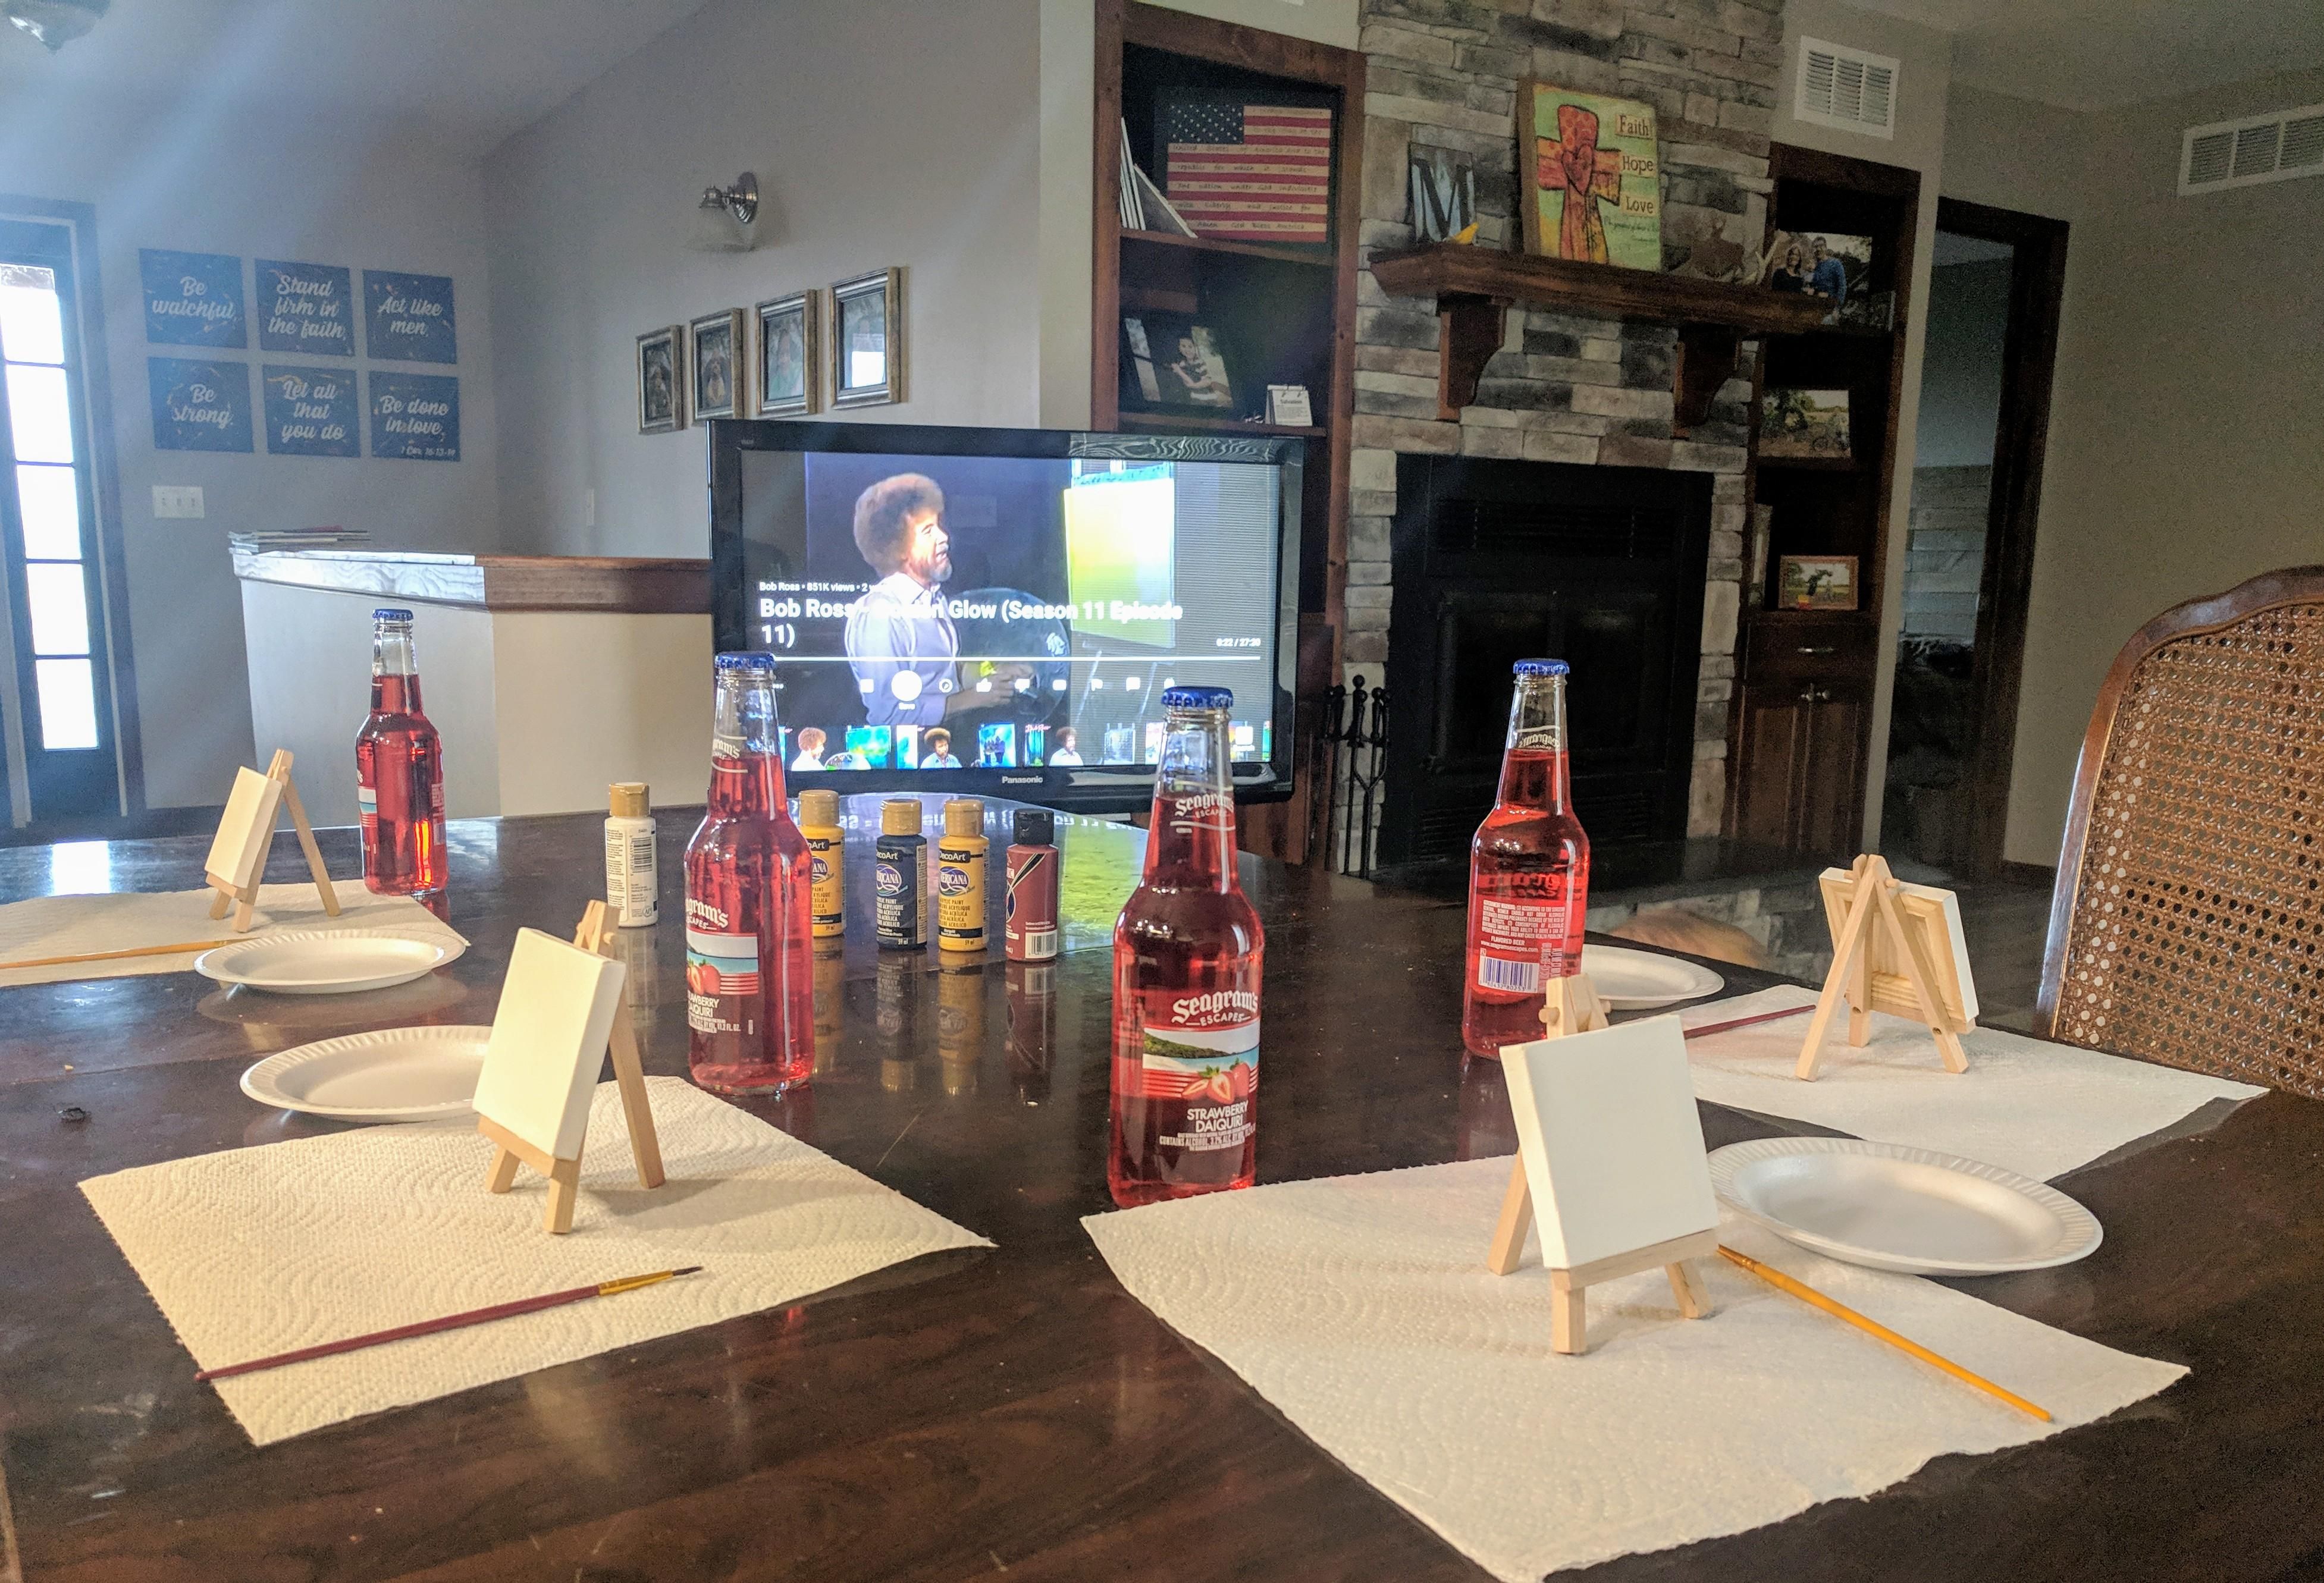 My wife asked if i could set up a little cork and canvas for her and her friends. I doubt this is what she meant.